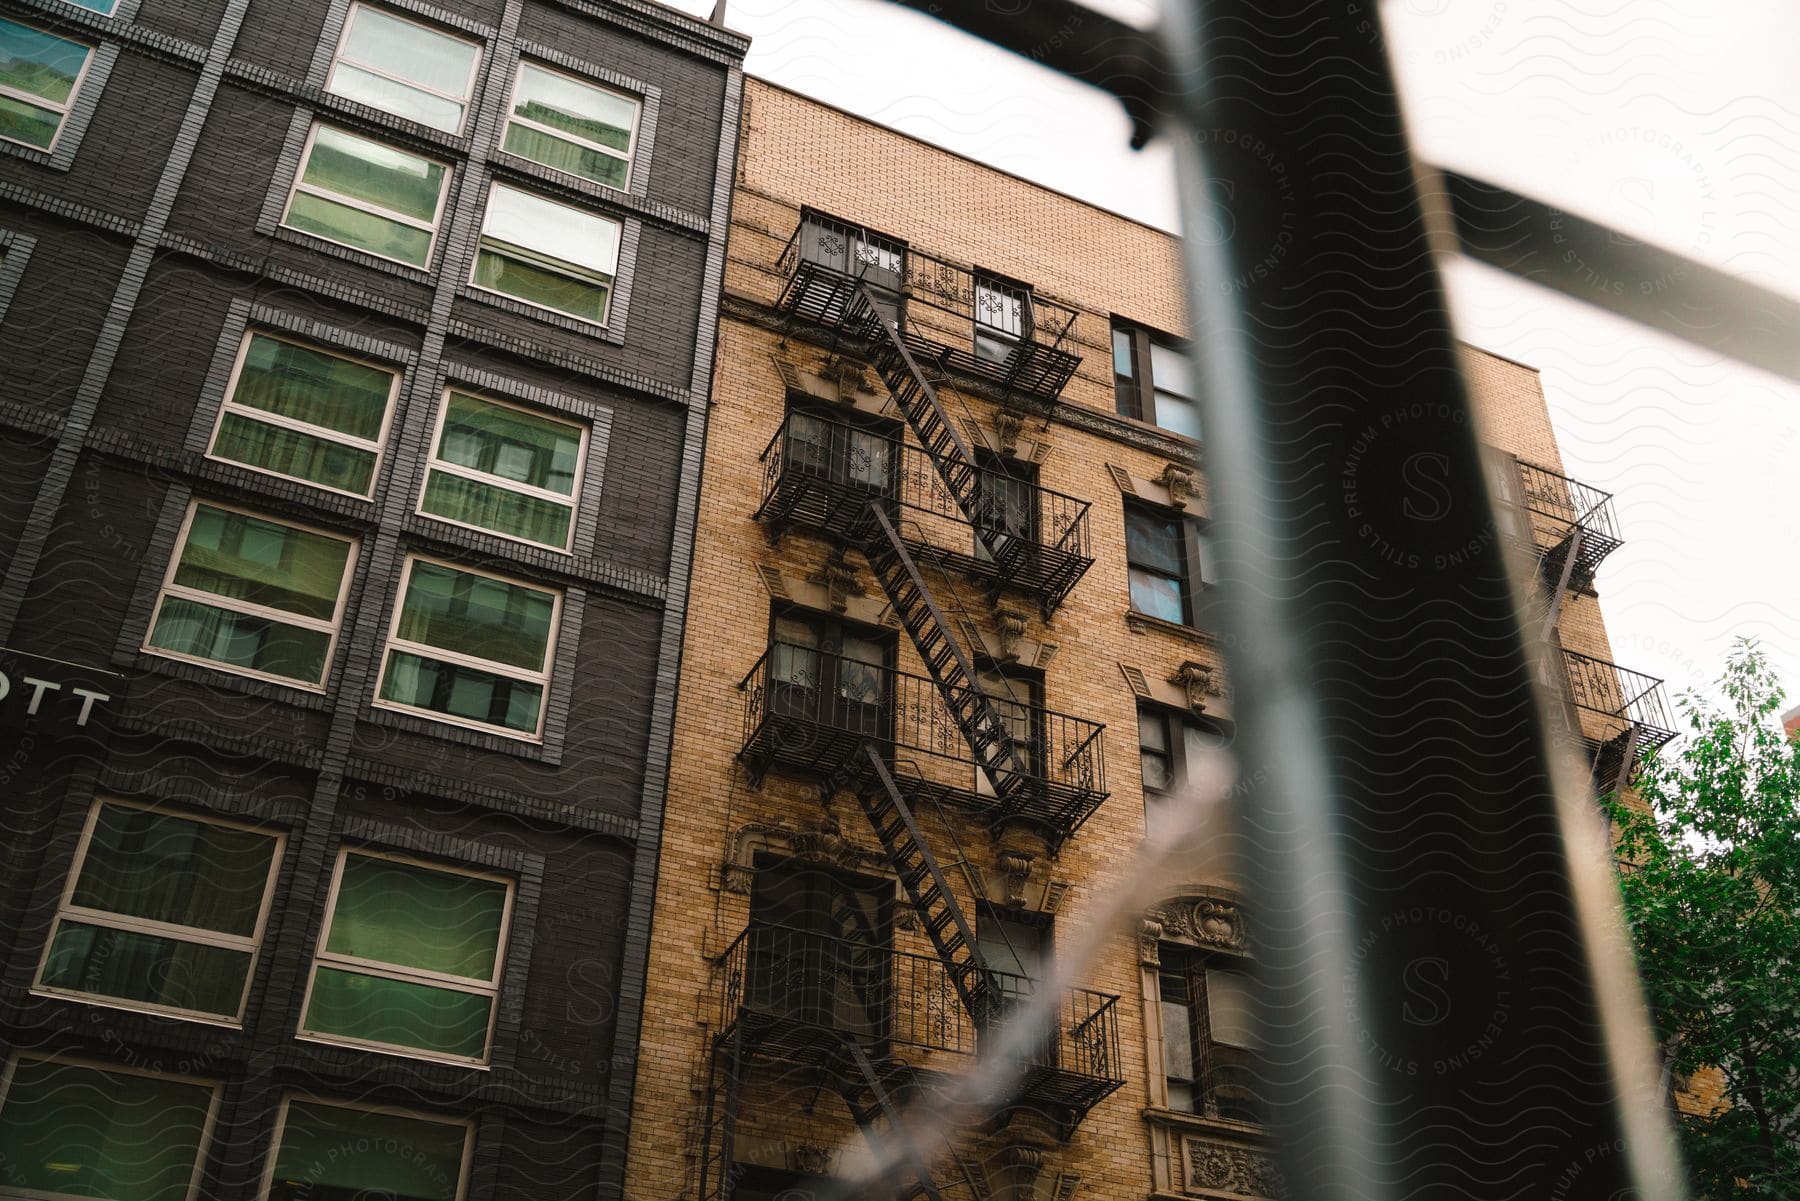 Fire escape of a condo building seen from a neighboring window on a cloudy day